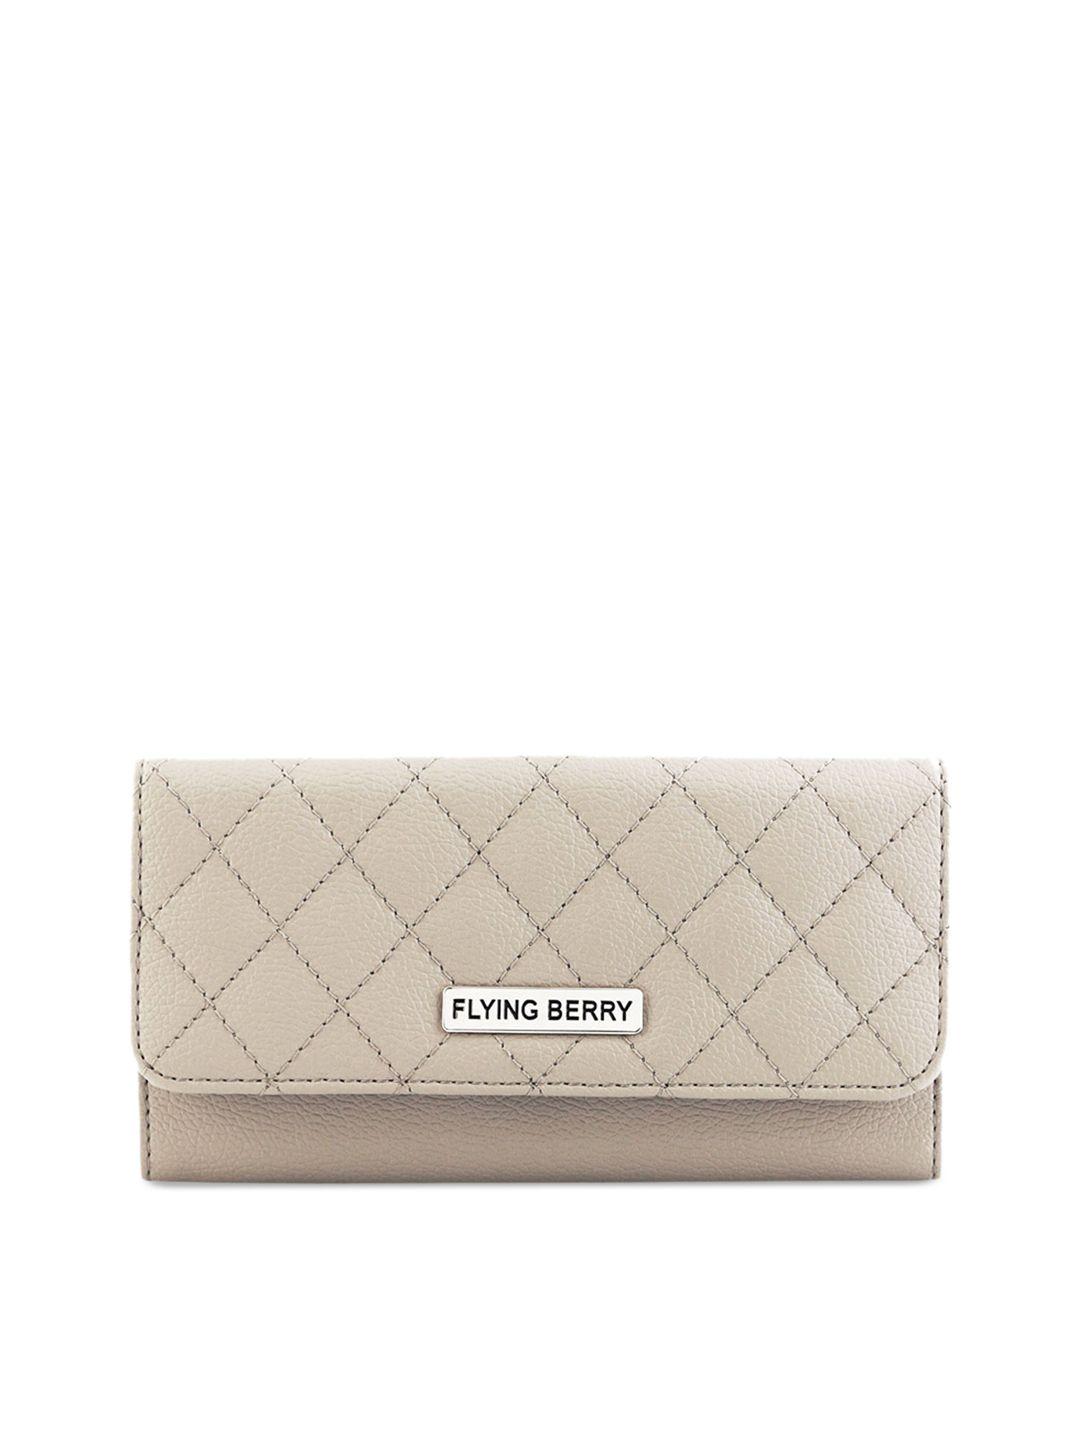 flying berry grey quilted clutch